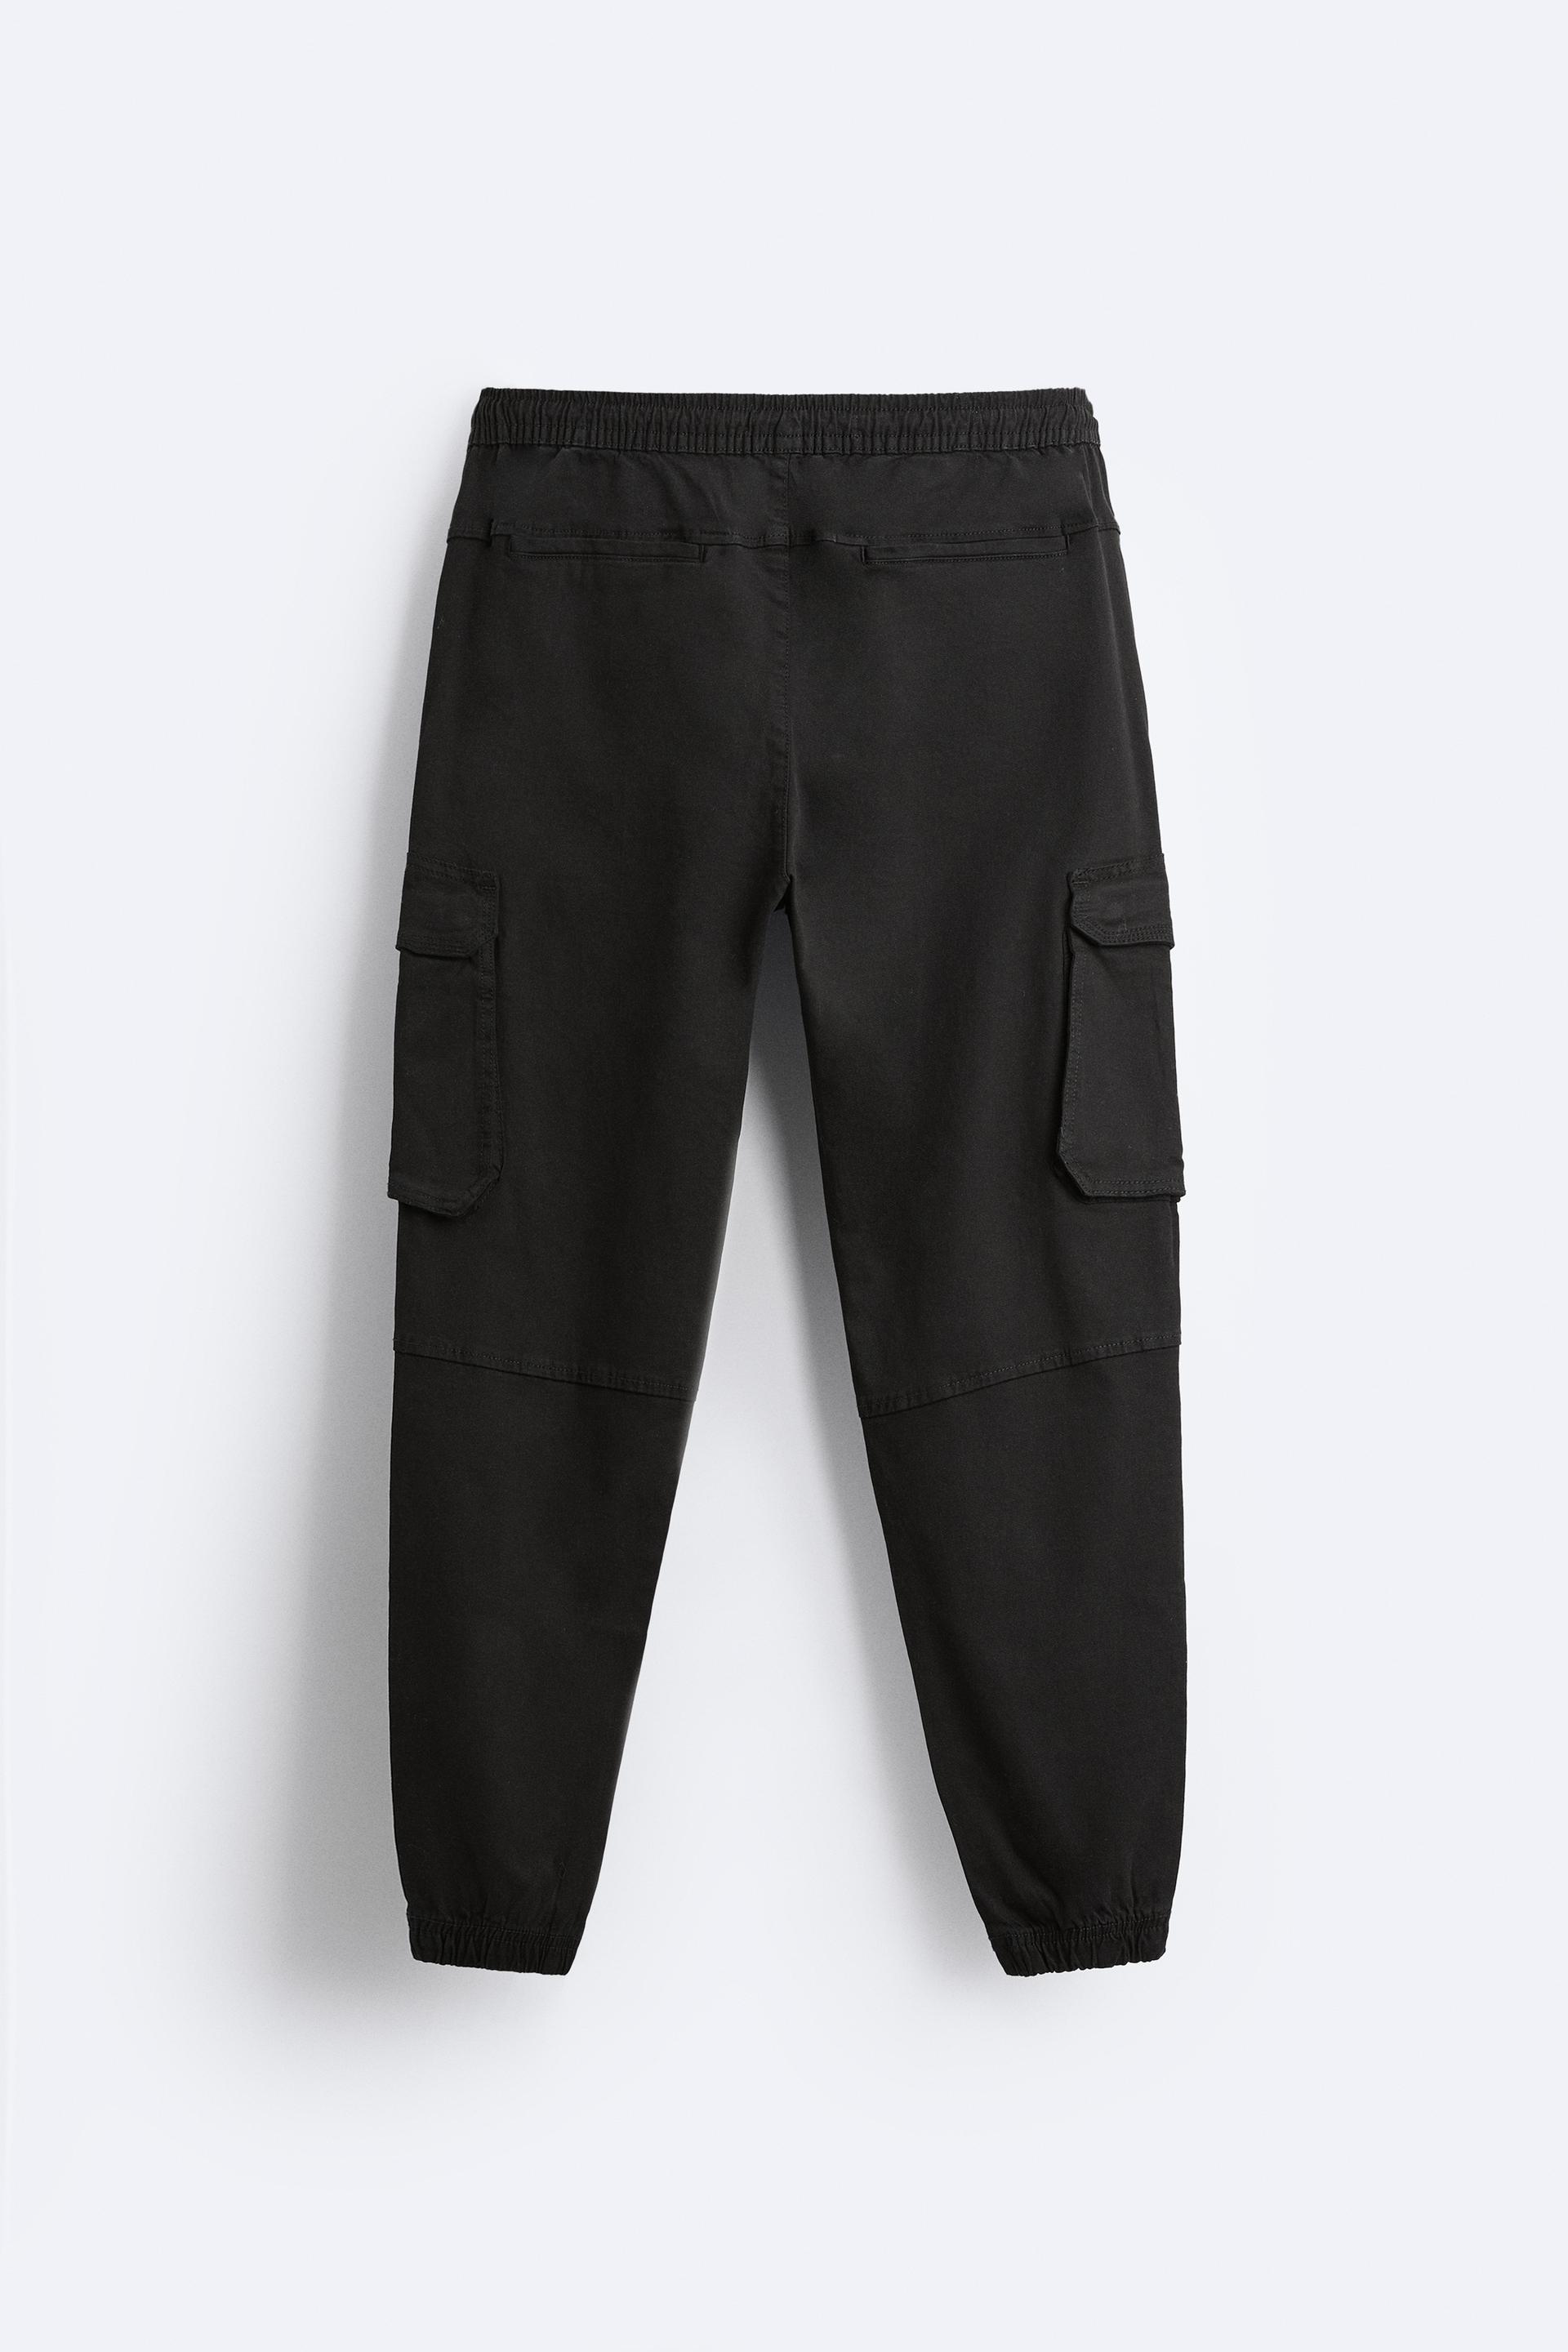 Cute in Cargo: Zara Cargo Trousers, 13 New Arrivals From Zara That We're  Coveting For November